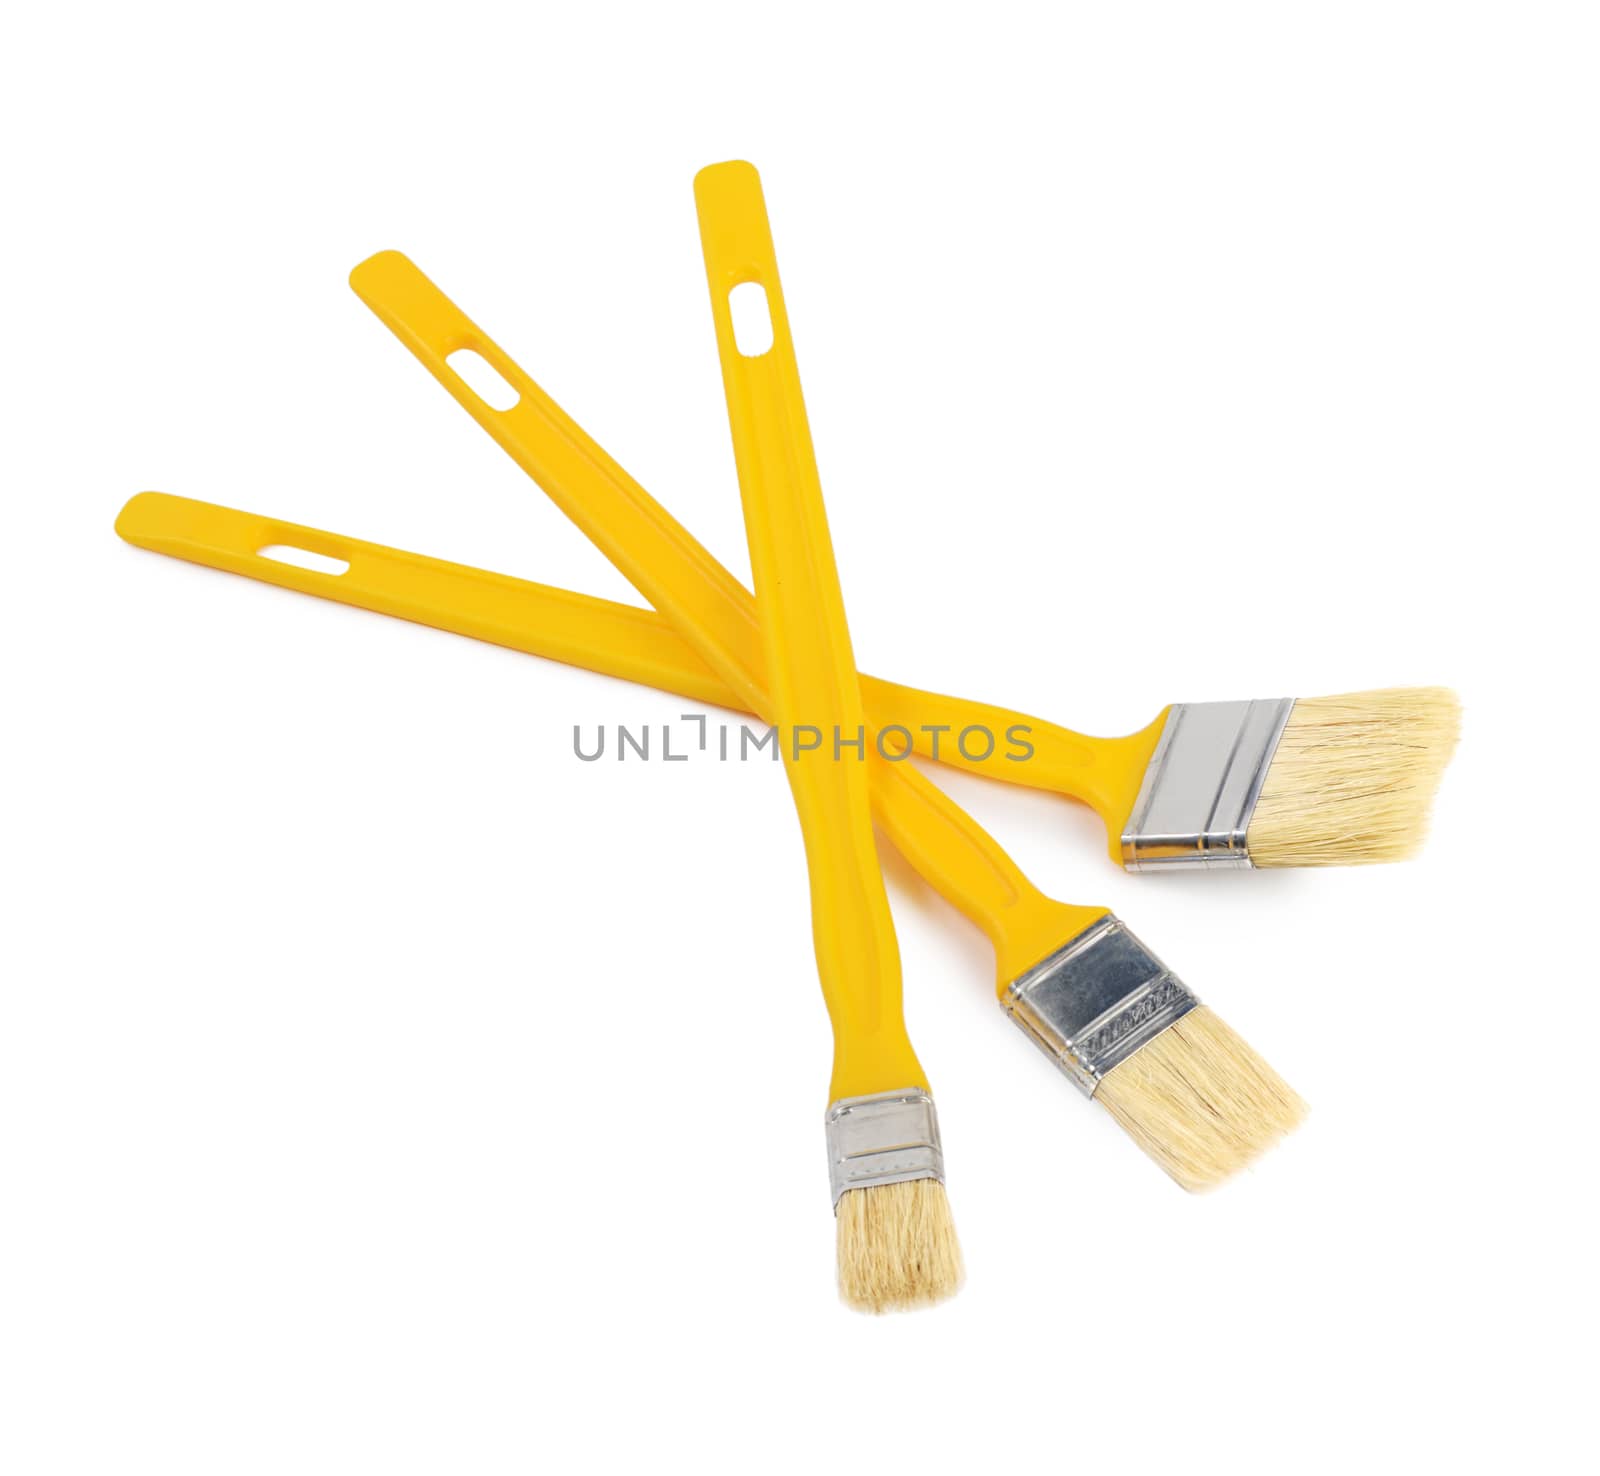 The yellow a brush for painting paint